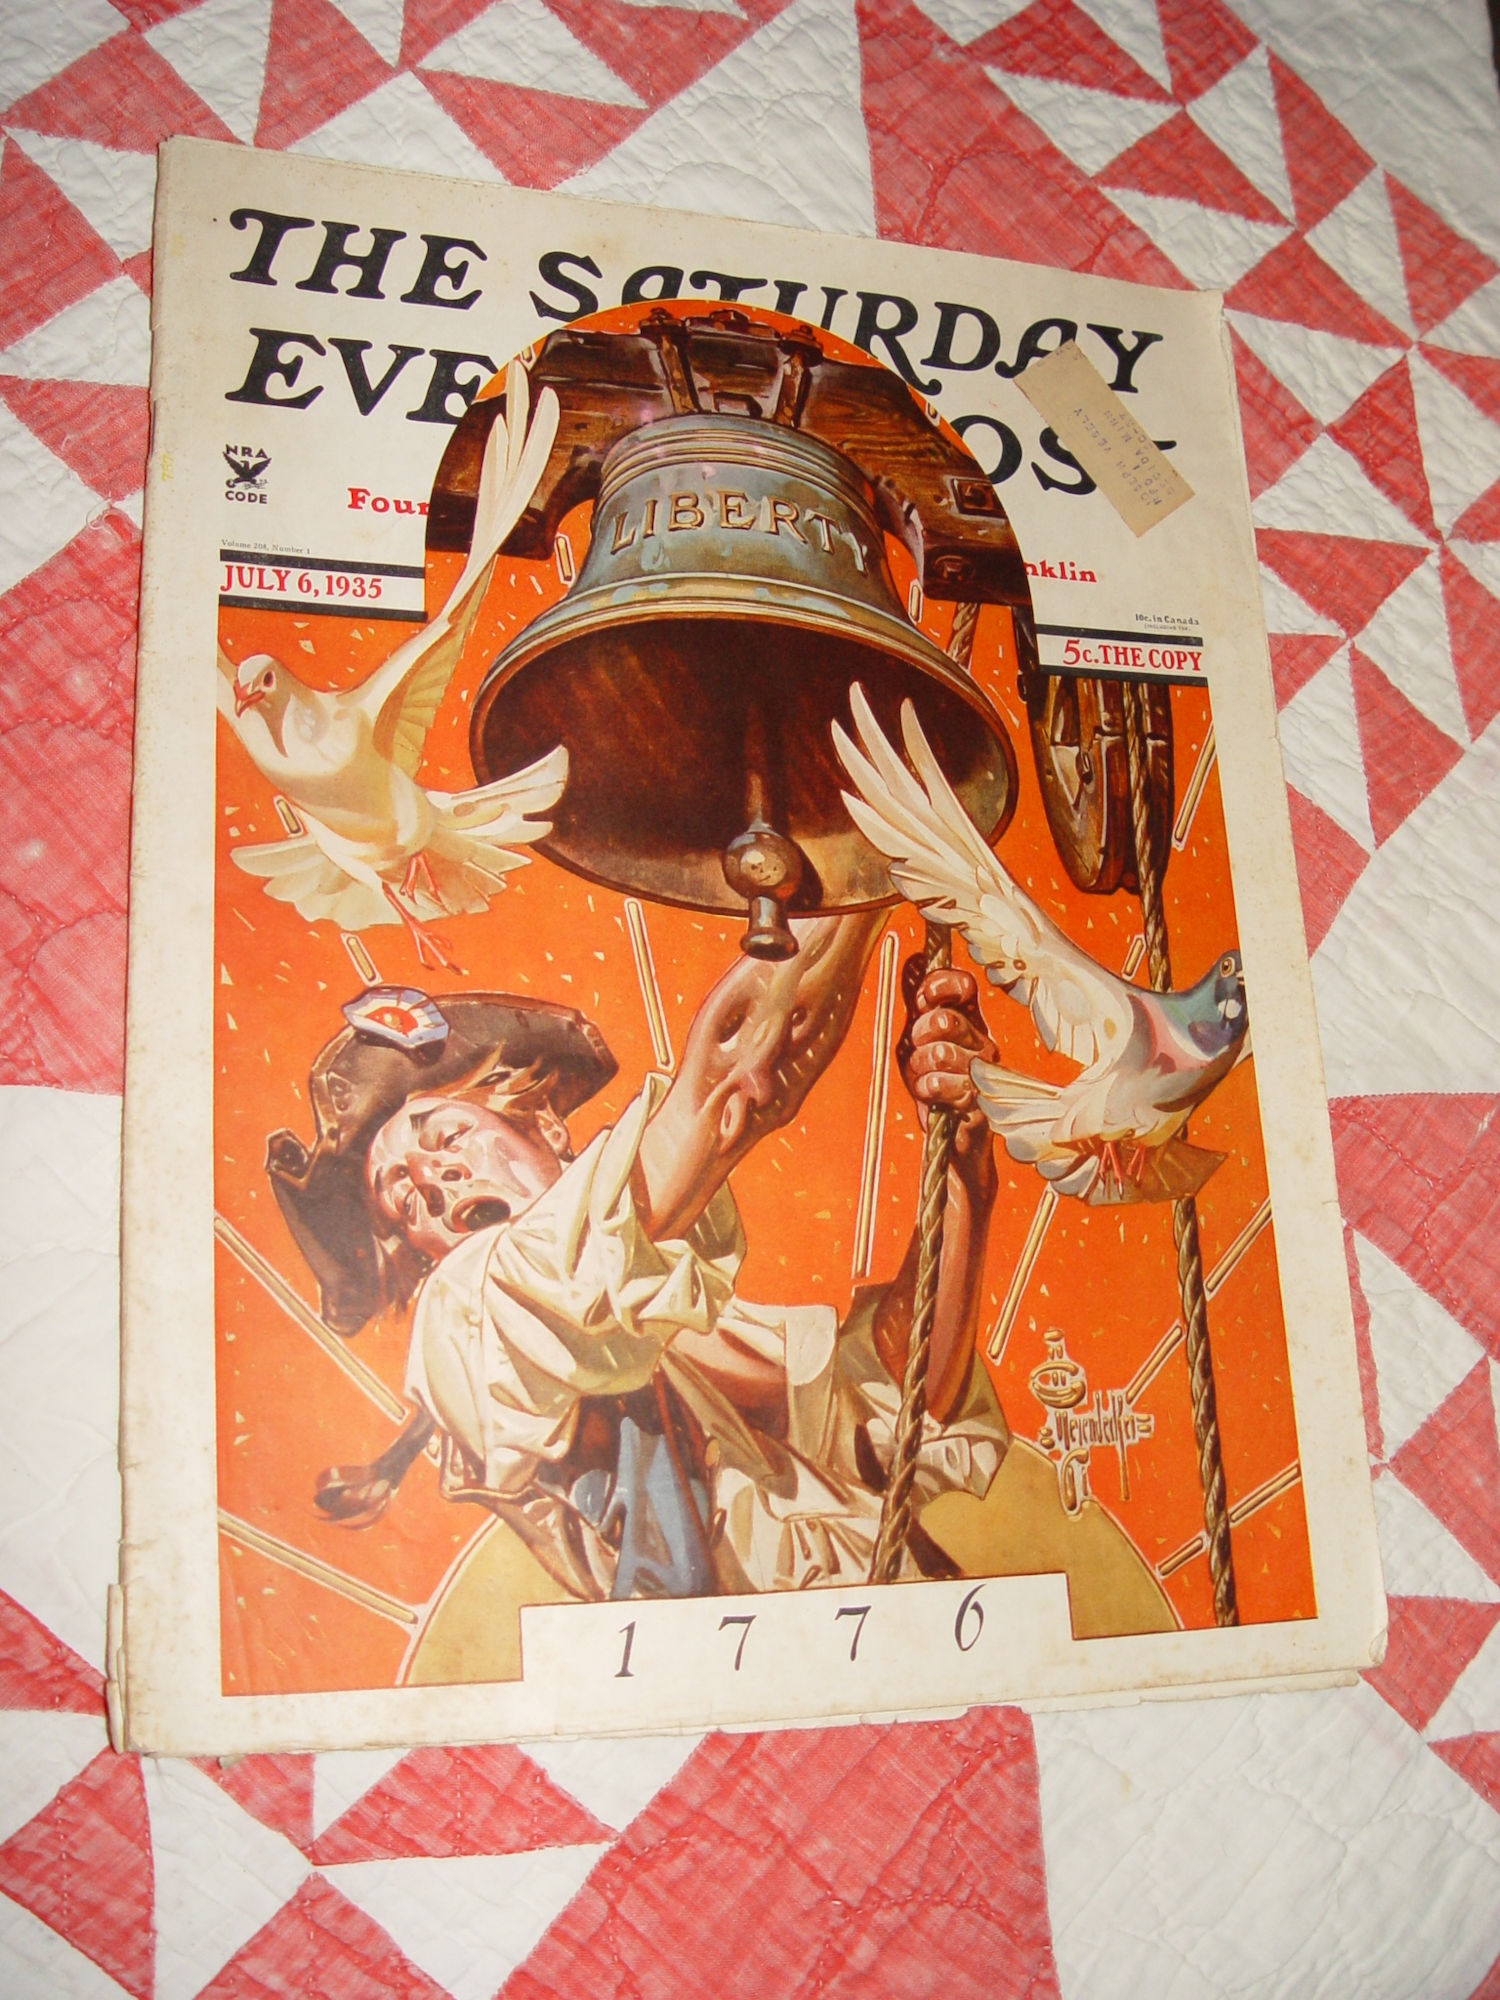 The Saturday Evening Post July 6, 1935
                        "Liberty Bell 1776"